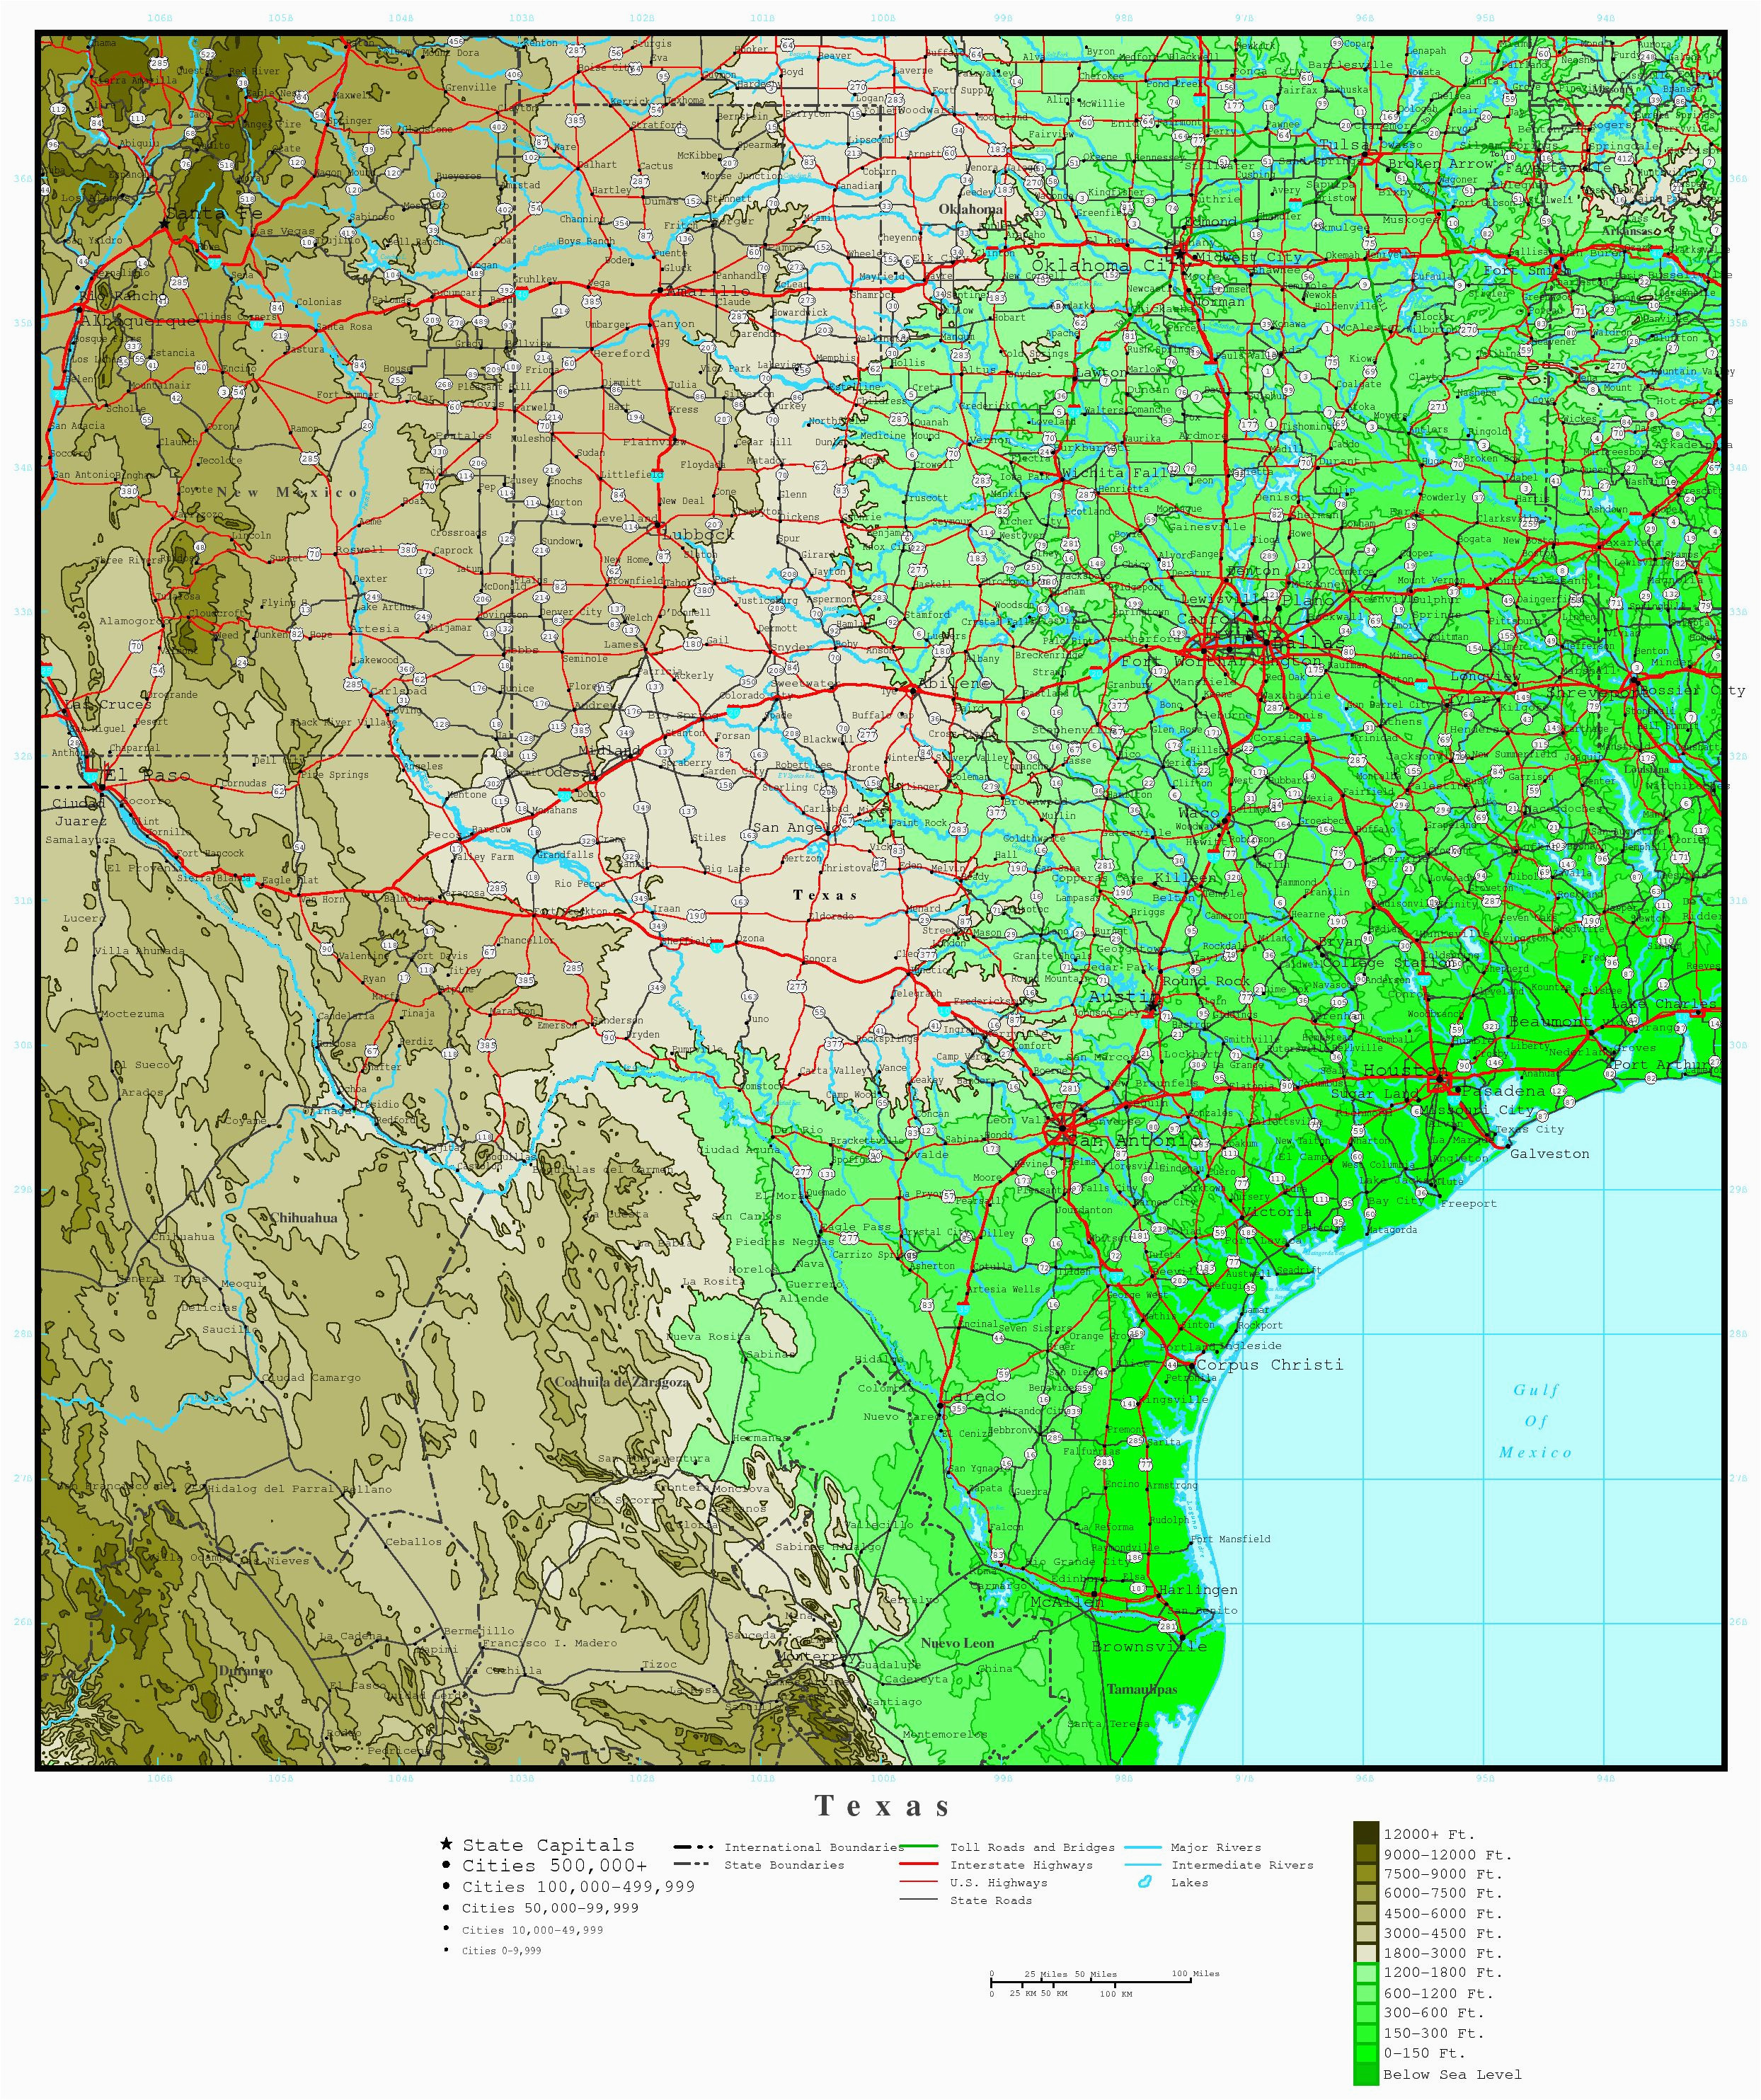 topographic map of southeast us us terrain map download map usa